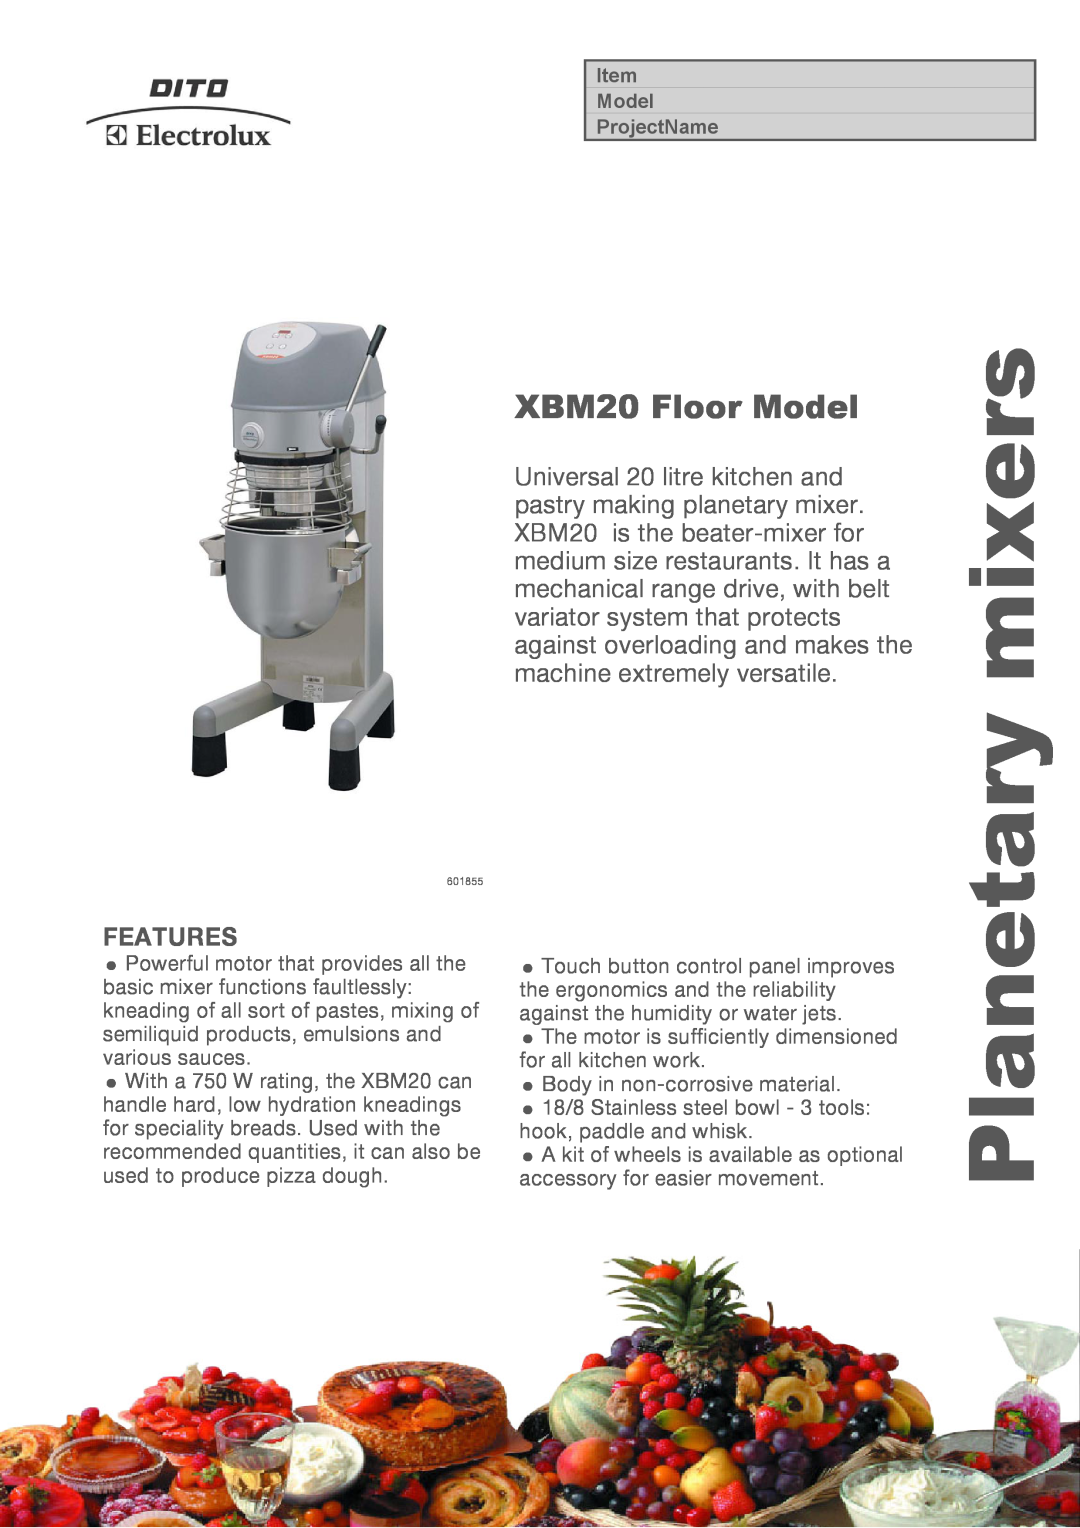 Electrolux XBMF20S45, XBMF20S5 manual Features, mixers, Planetary, XBM20 Floor Model 